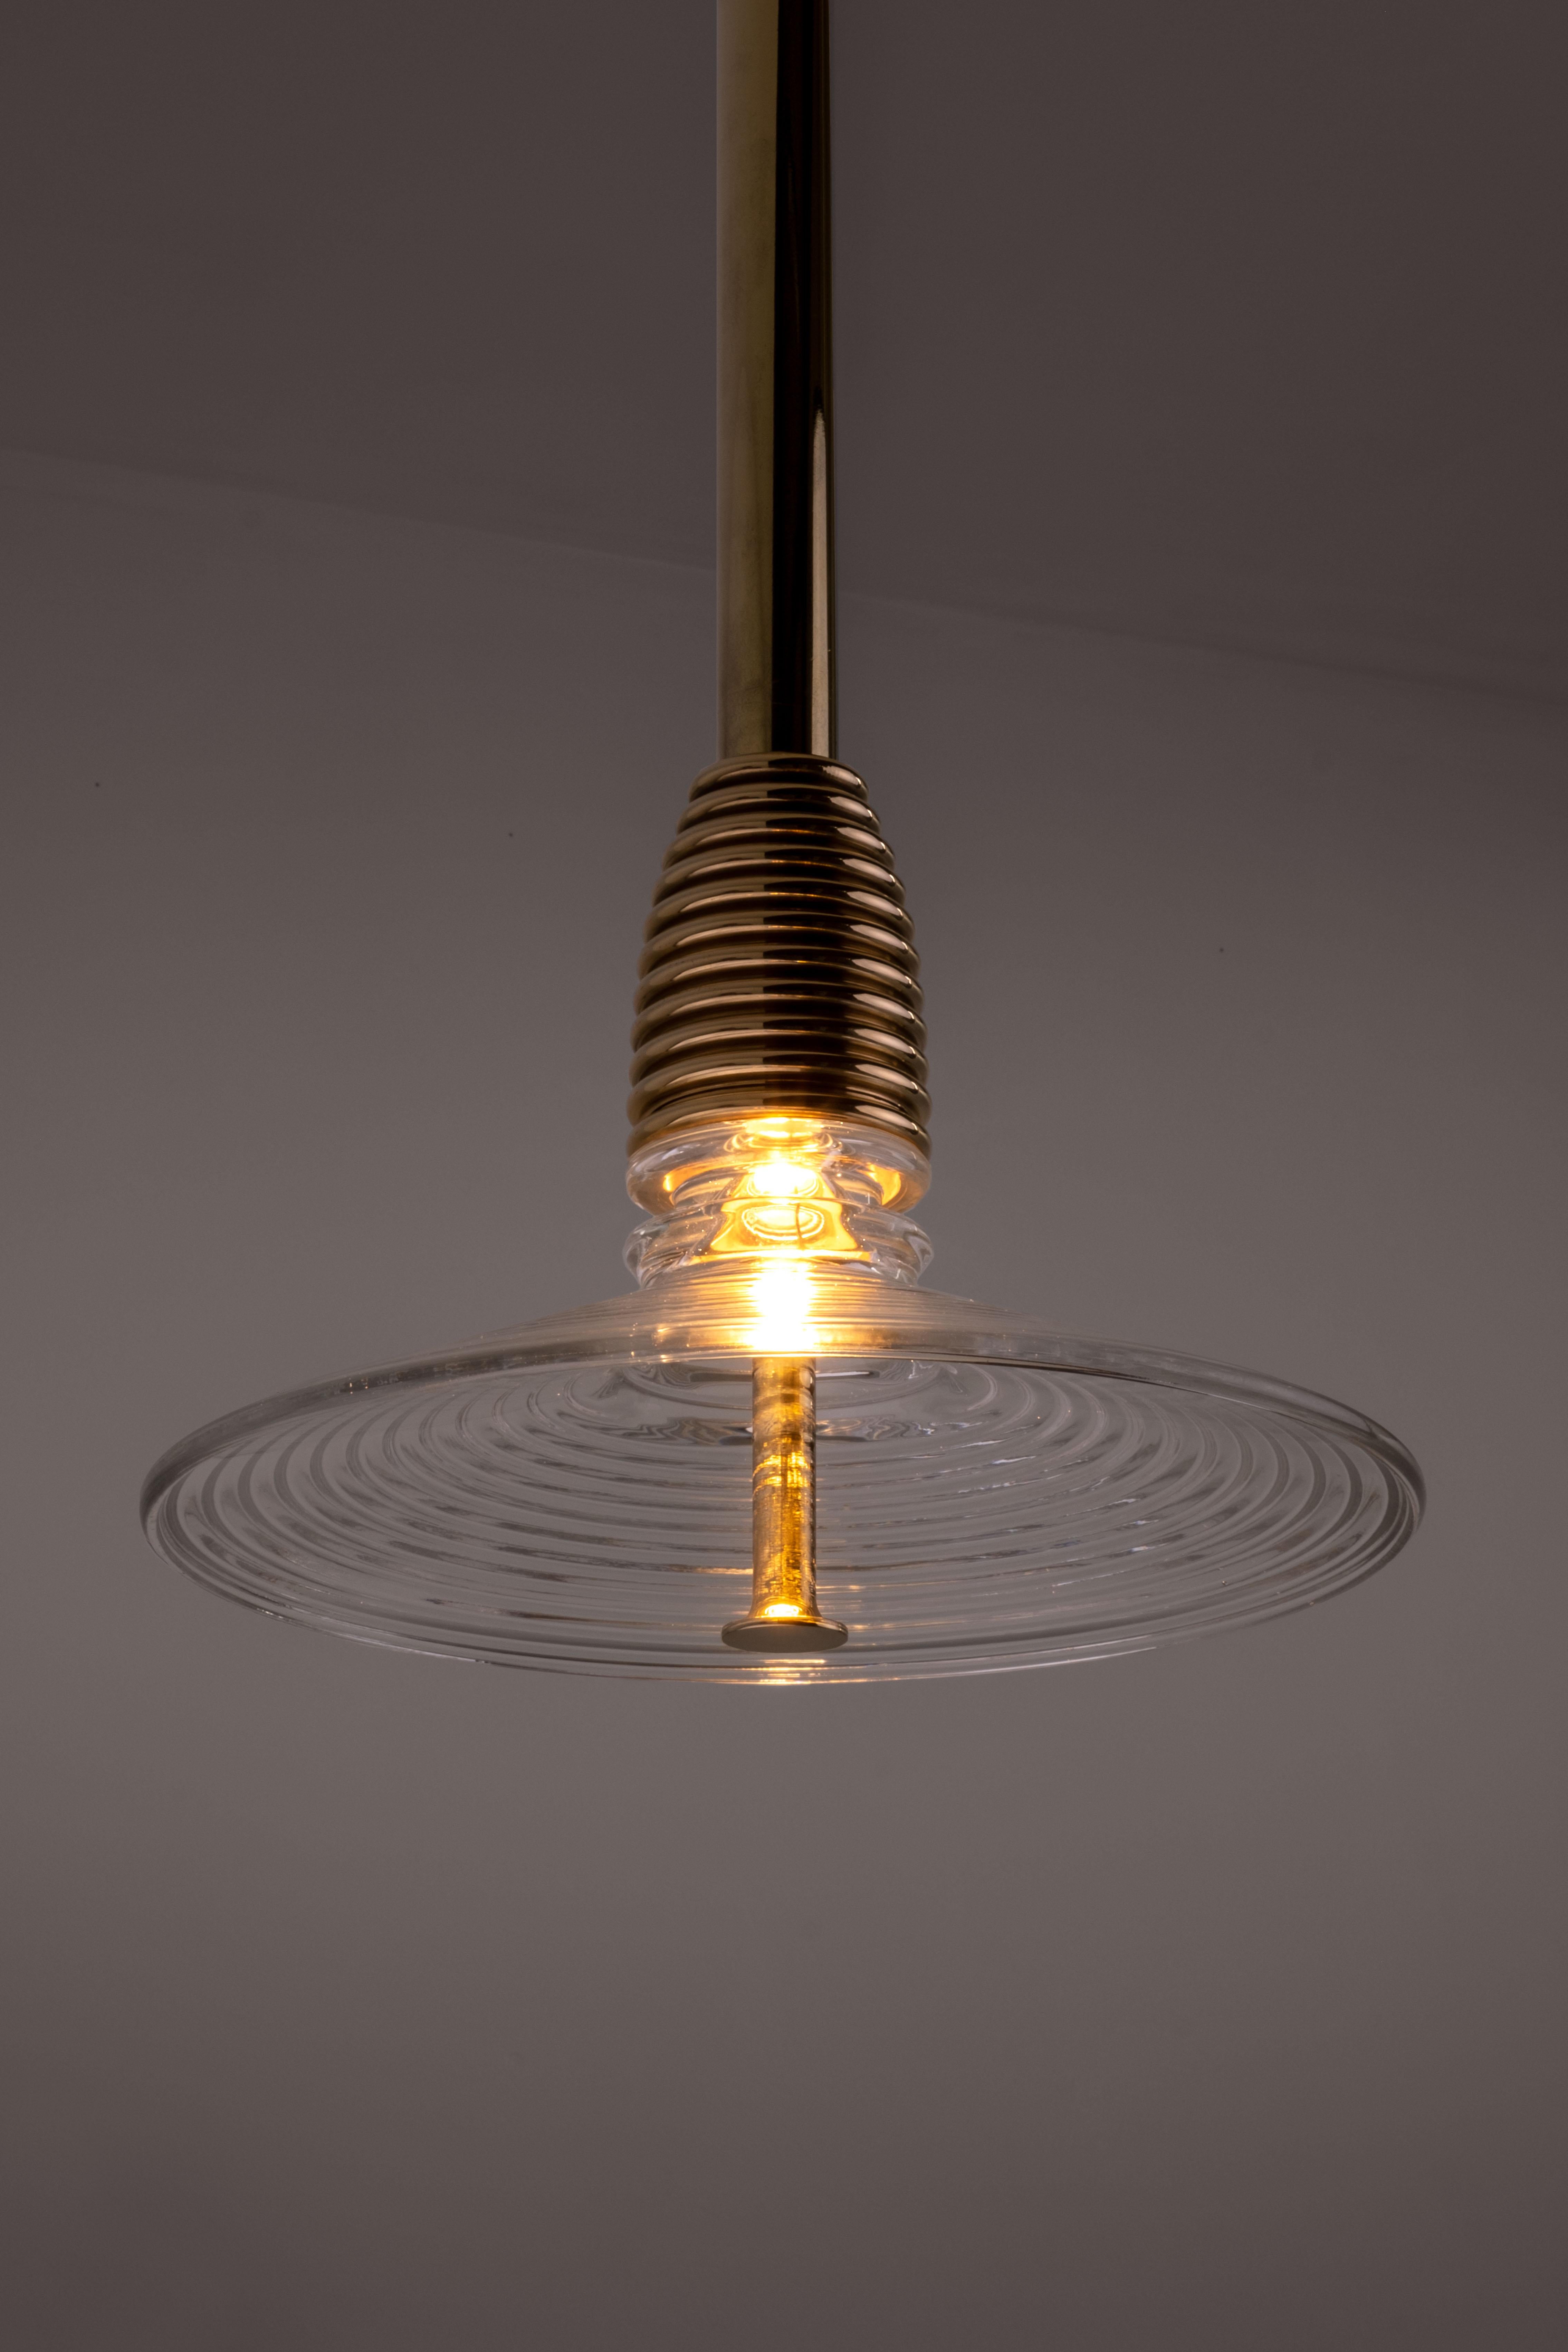 The Insulator 'B' Pendant in polished brass and clear glass by NOVOCASTRIAN deco For Sale 5